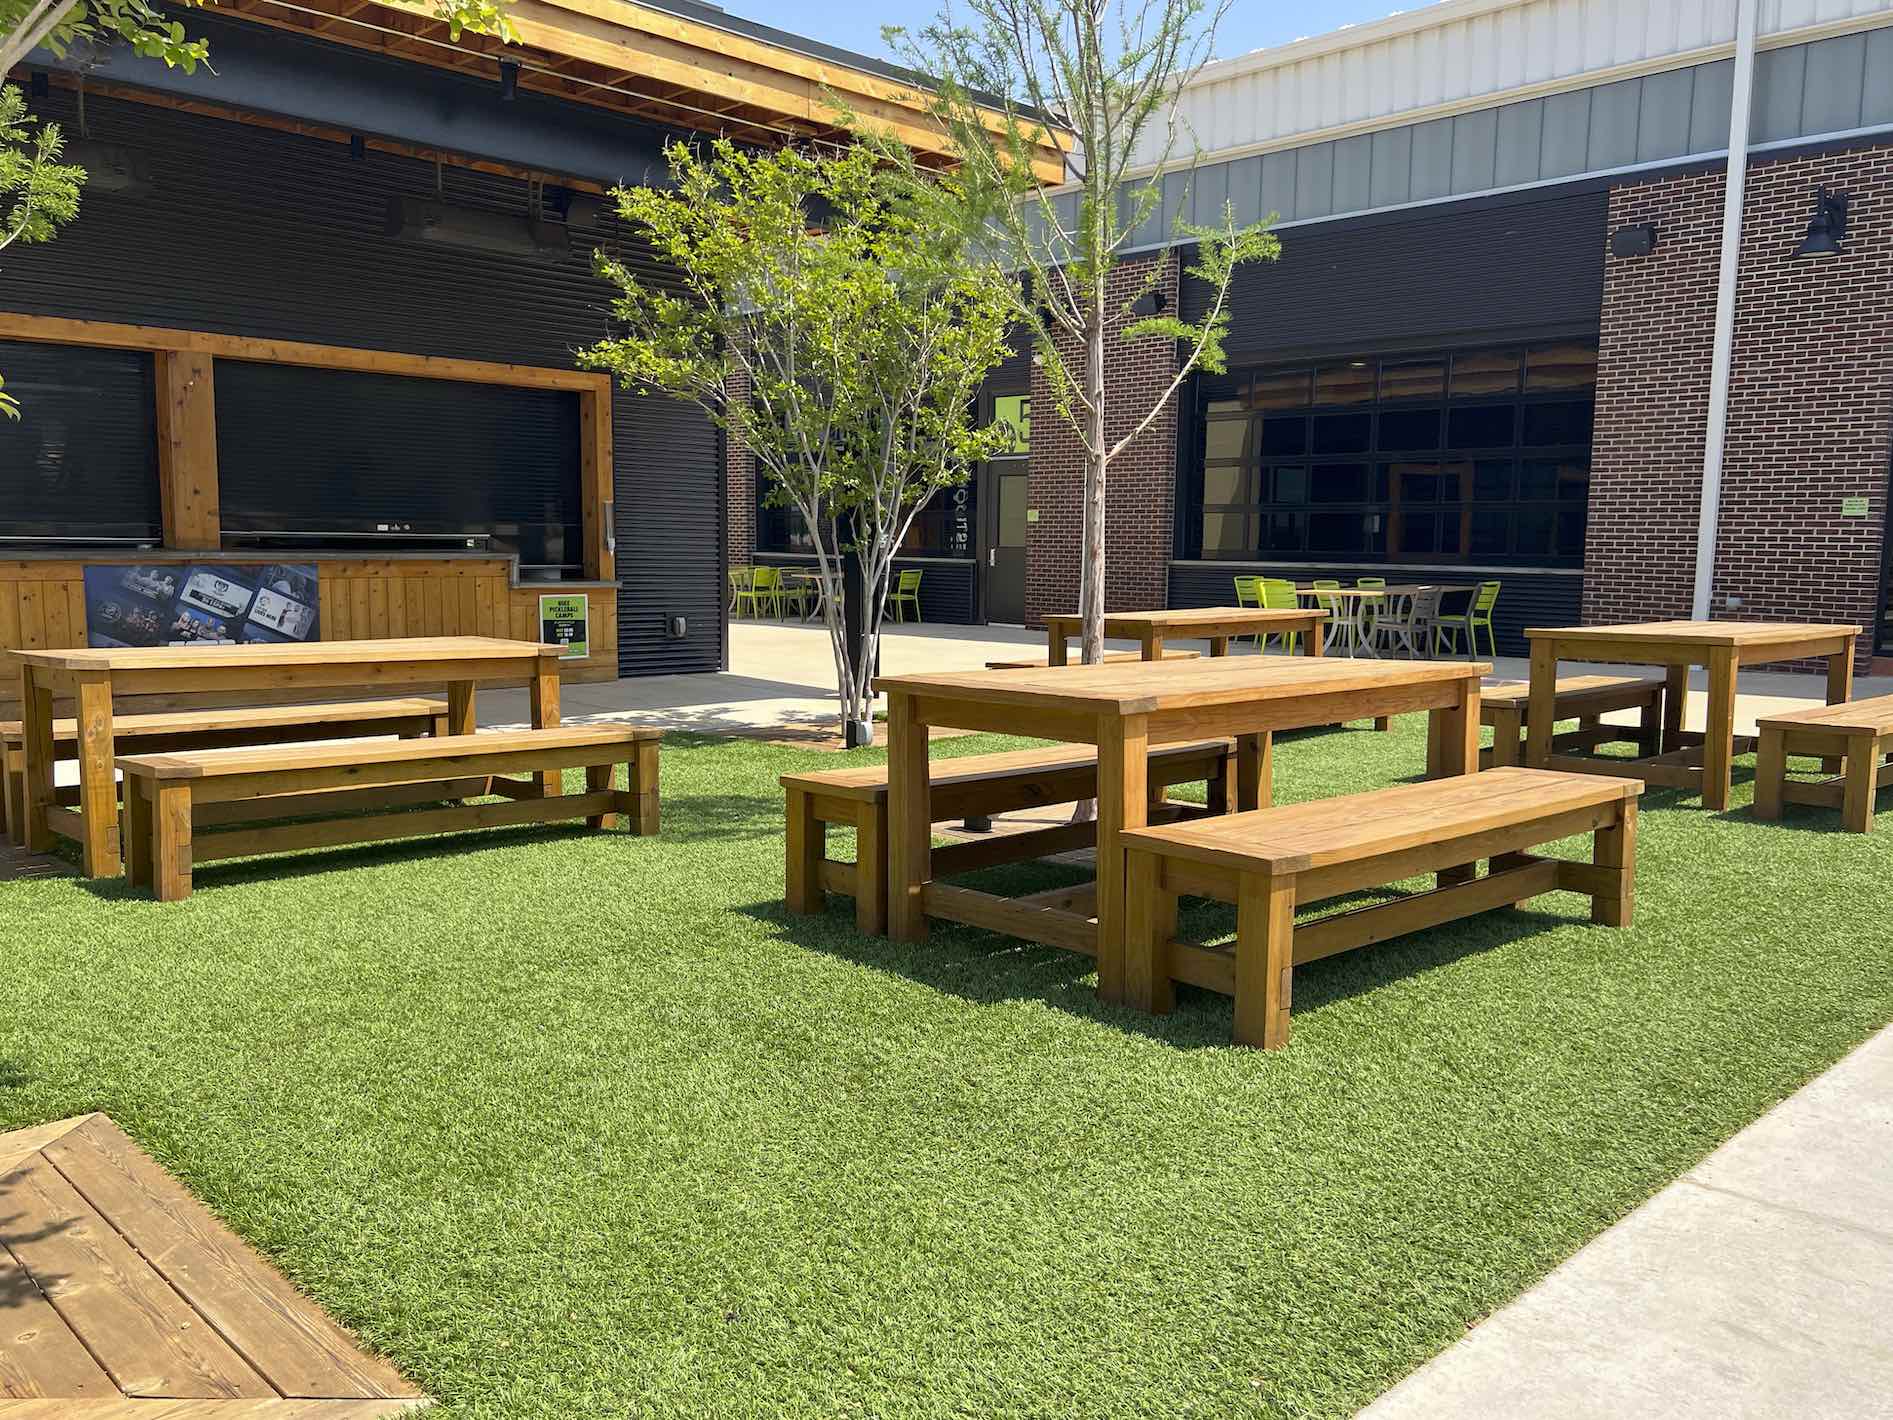 Outdoor patio with artificial grass, wooden tables and benches, a young tree, buildings with black and brick facades, and clear blue sky above.